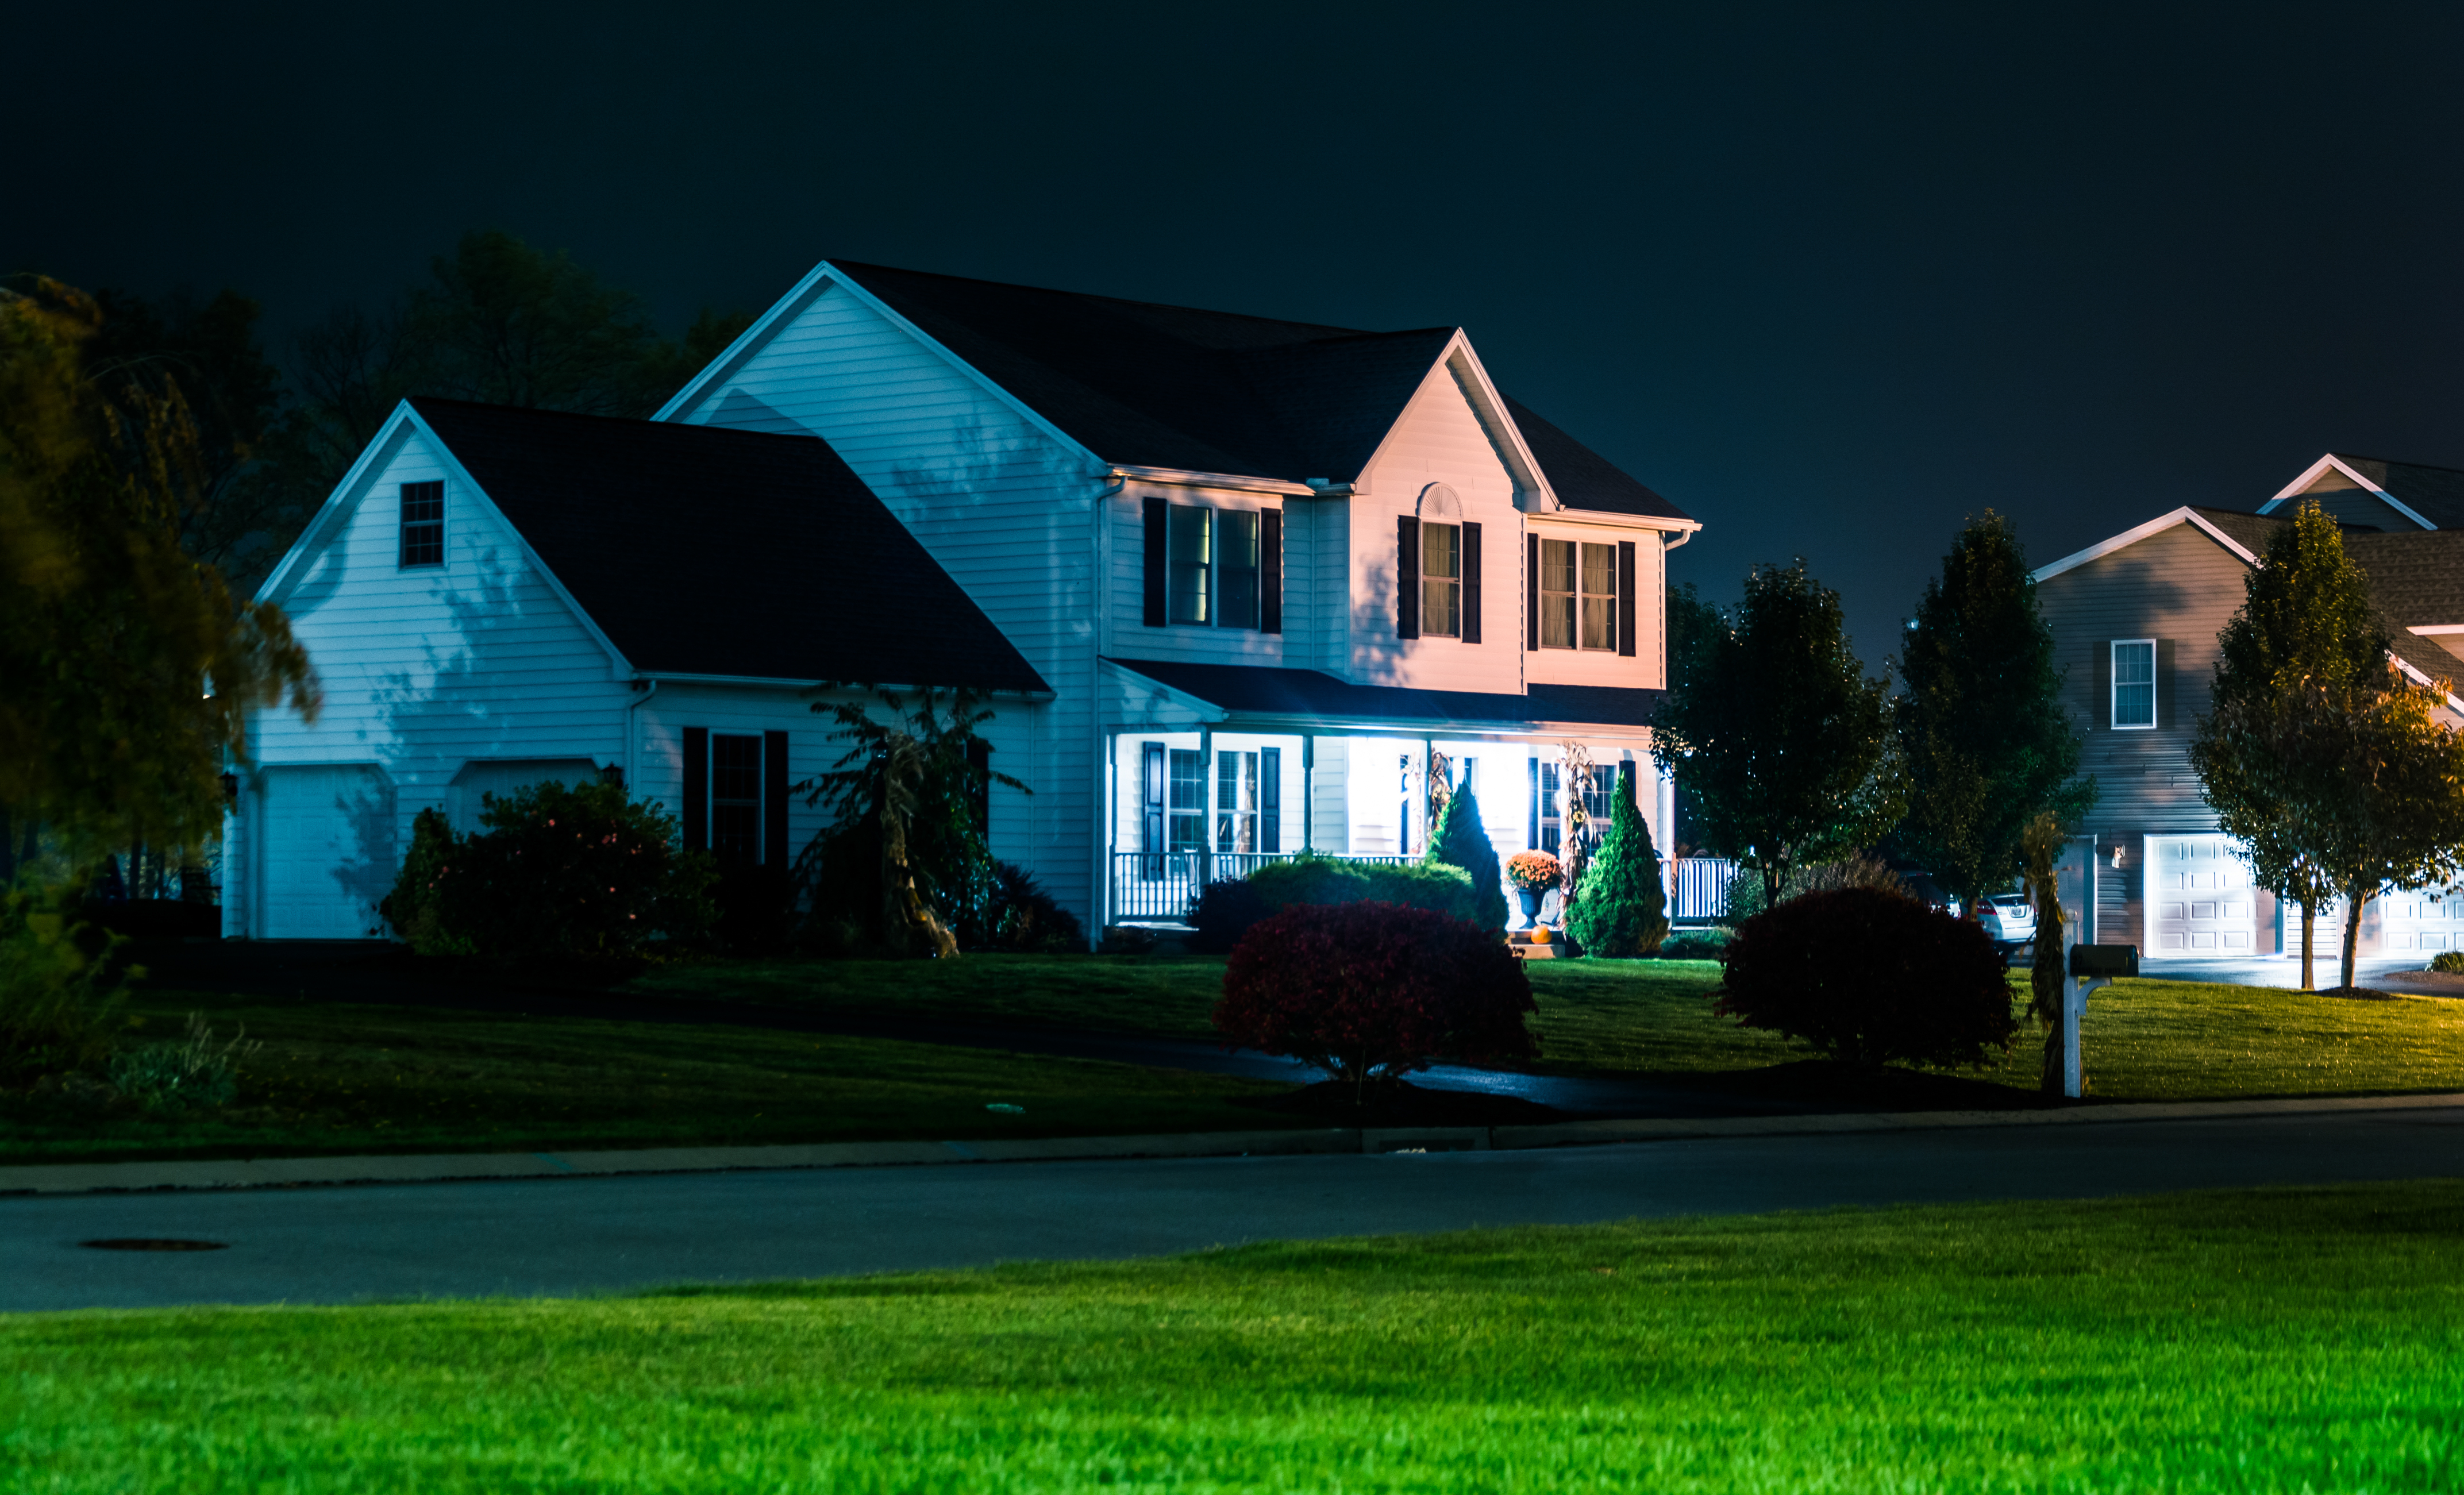 House at night. | Source: Shutterstock